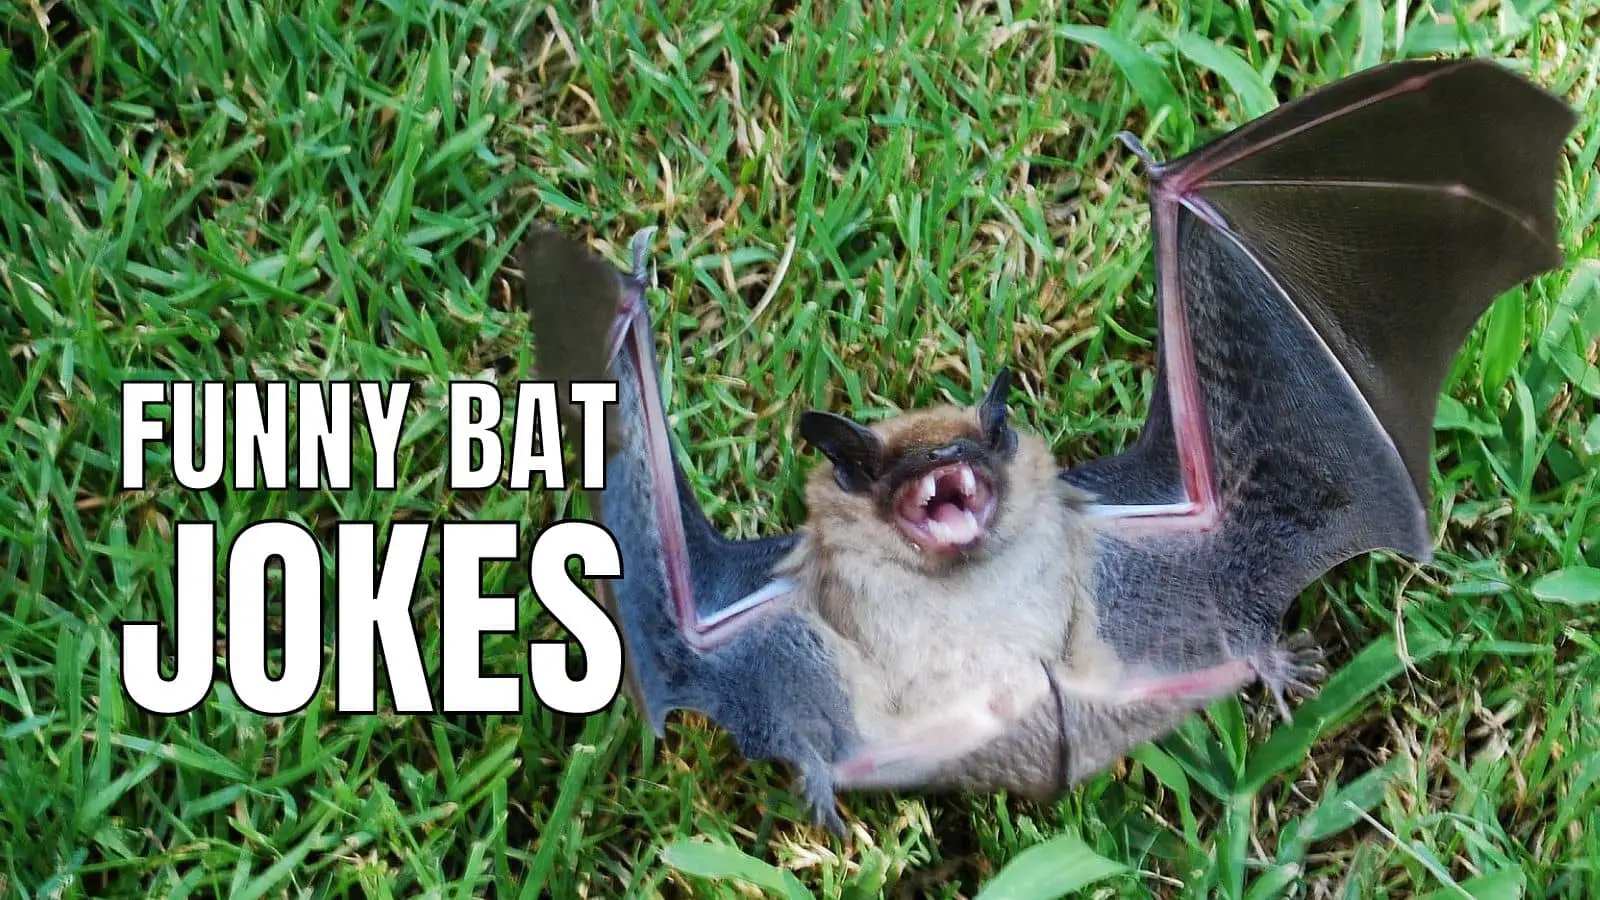 Funny Bat Jokes And Puns for Halloween